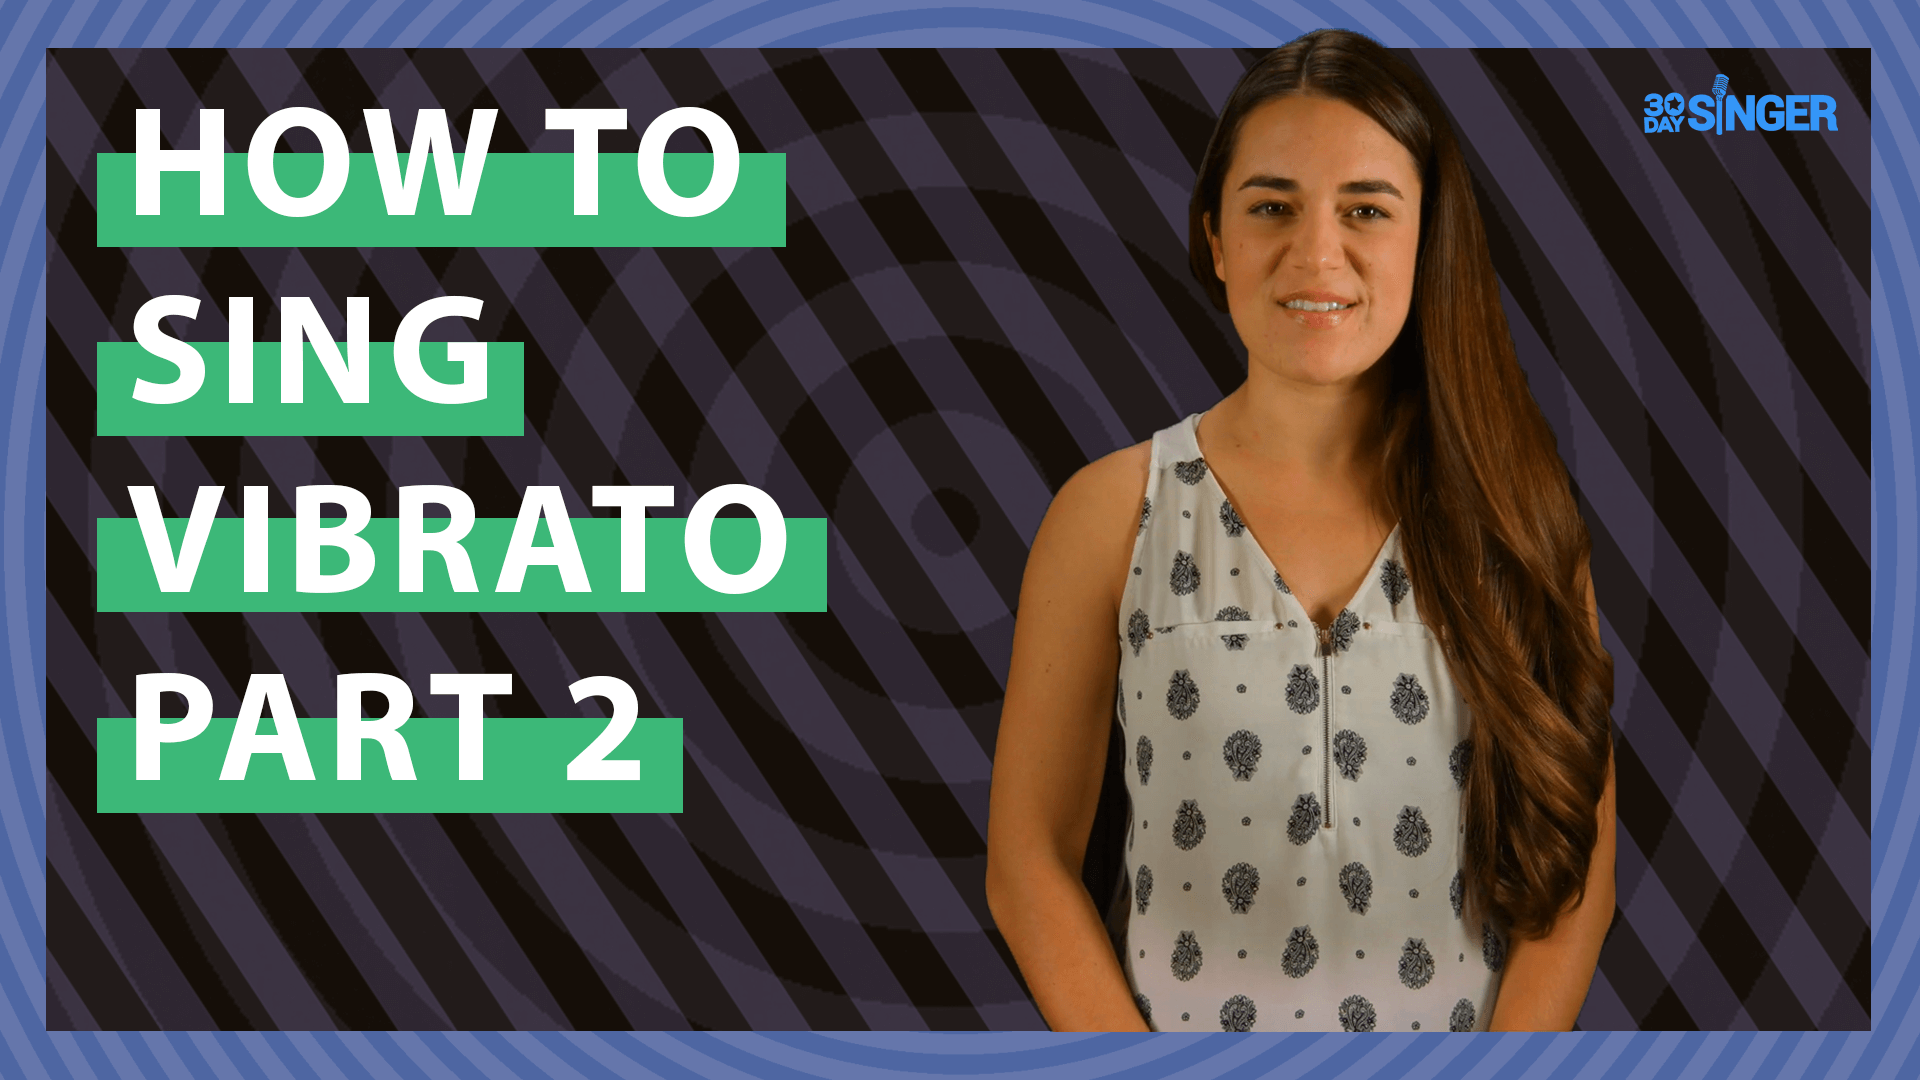 How to Sing Vibrato Part 2